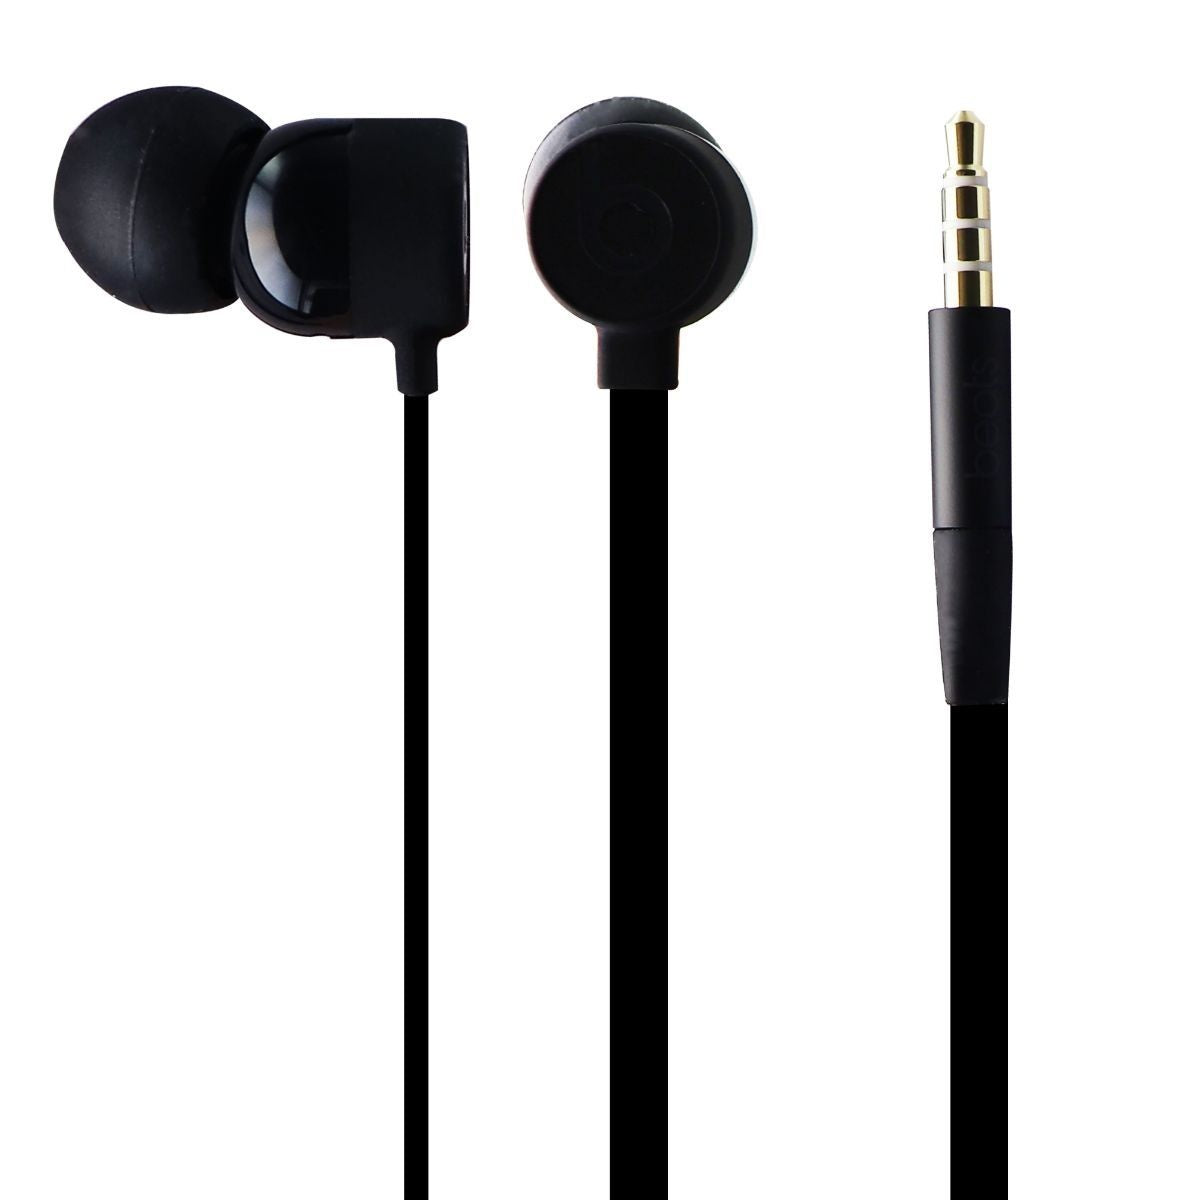 Beats by Dre. Dre urBeats3 Earphones with 3.5mm Plug - Black (MU982LL/A) Portable Audio - Headphones Beats by Dr. Dre    - Simple Cell Bulk Wholesale Pricing - USA Seller